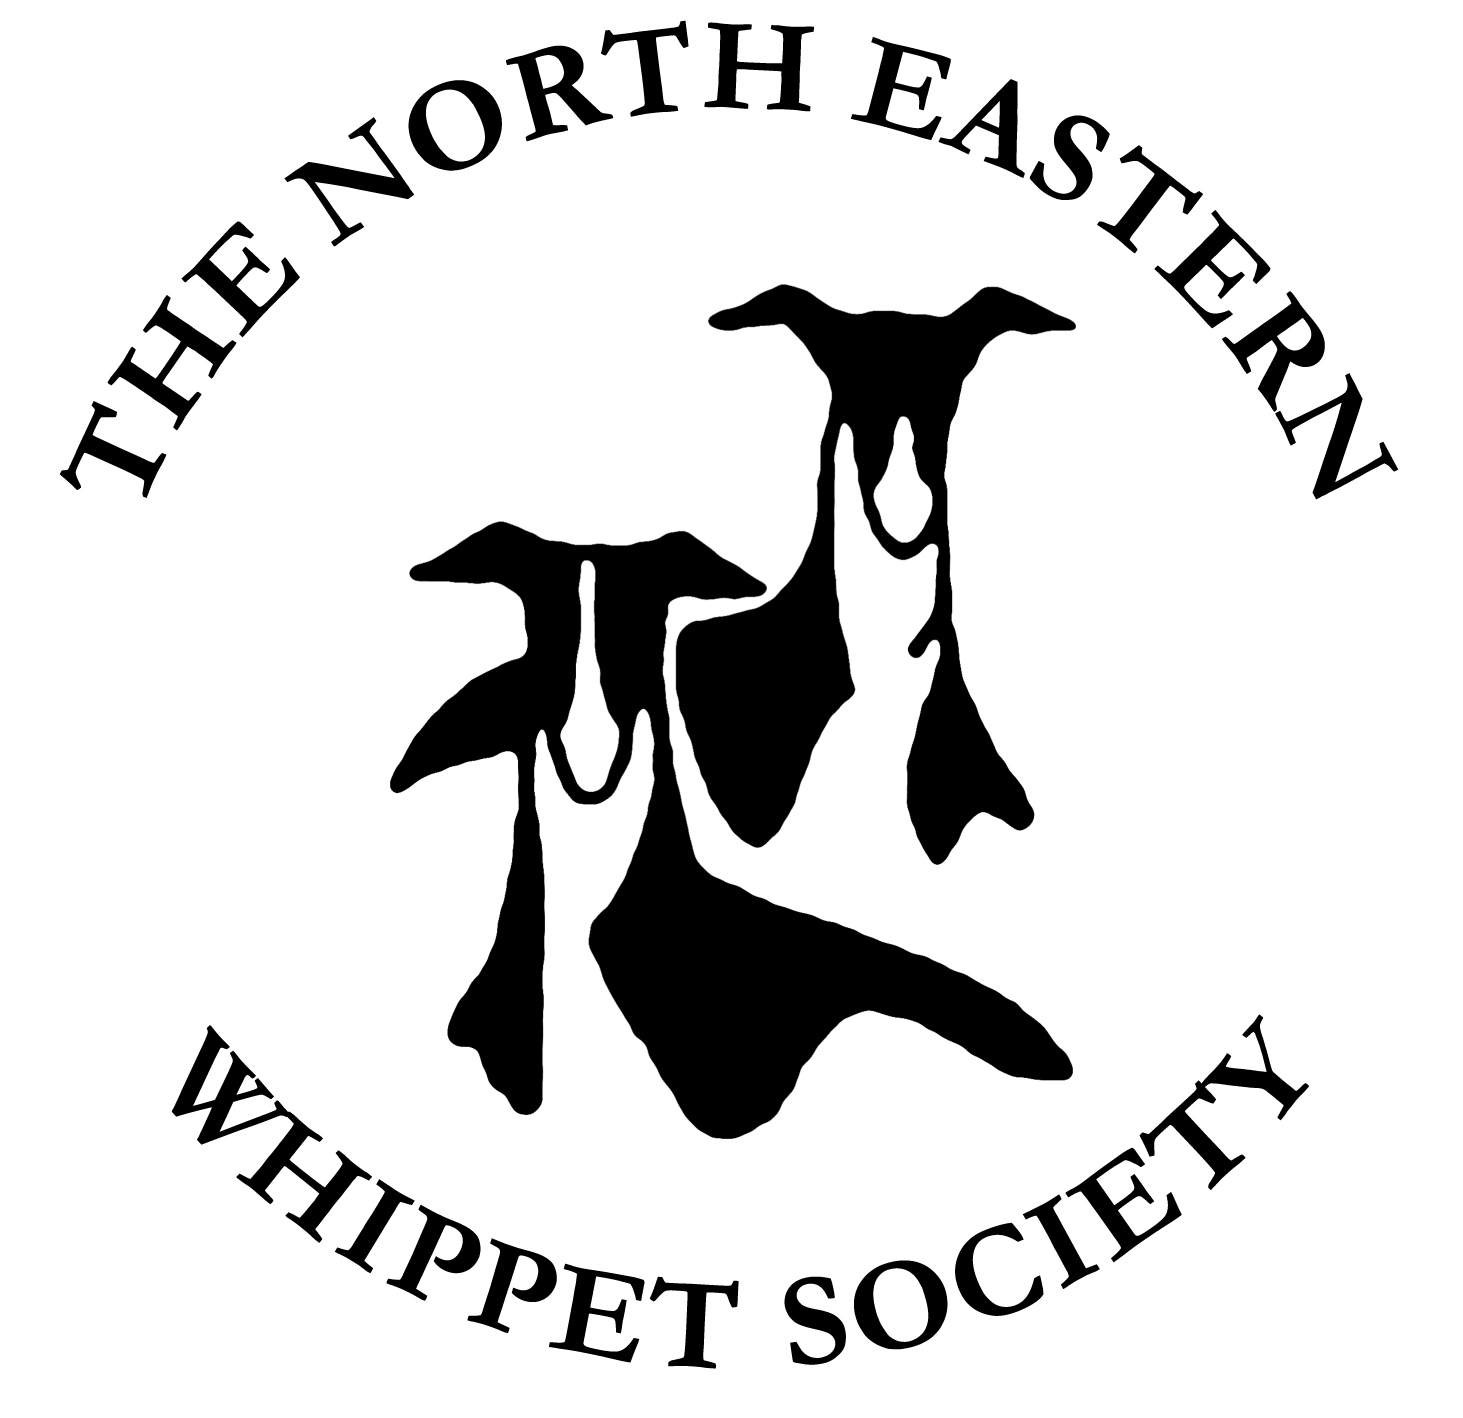 THE NORTH EASTERN WHIPPET SOCIETY - Ch Show - July 4th